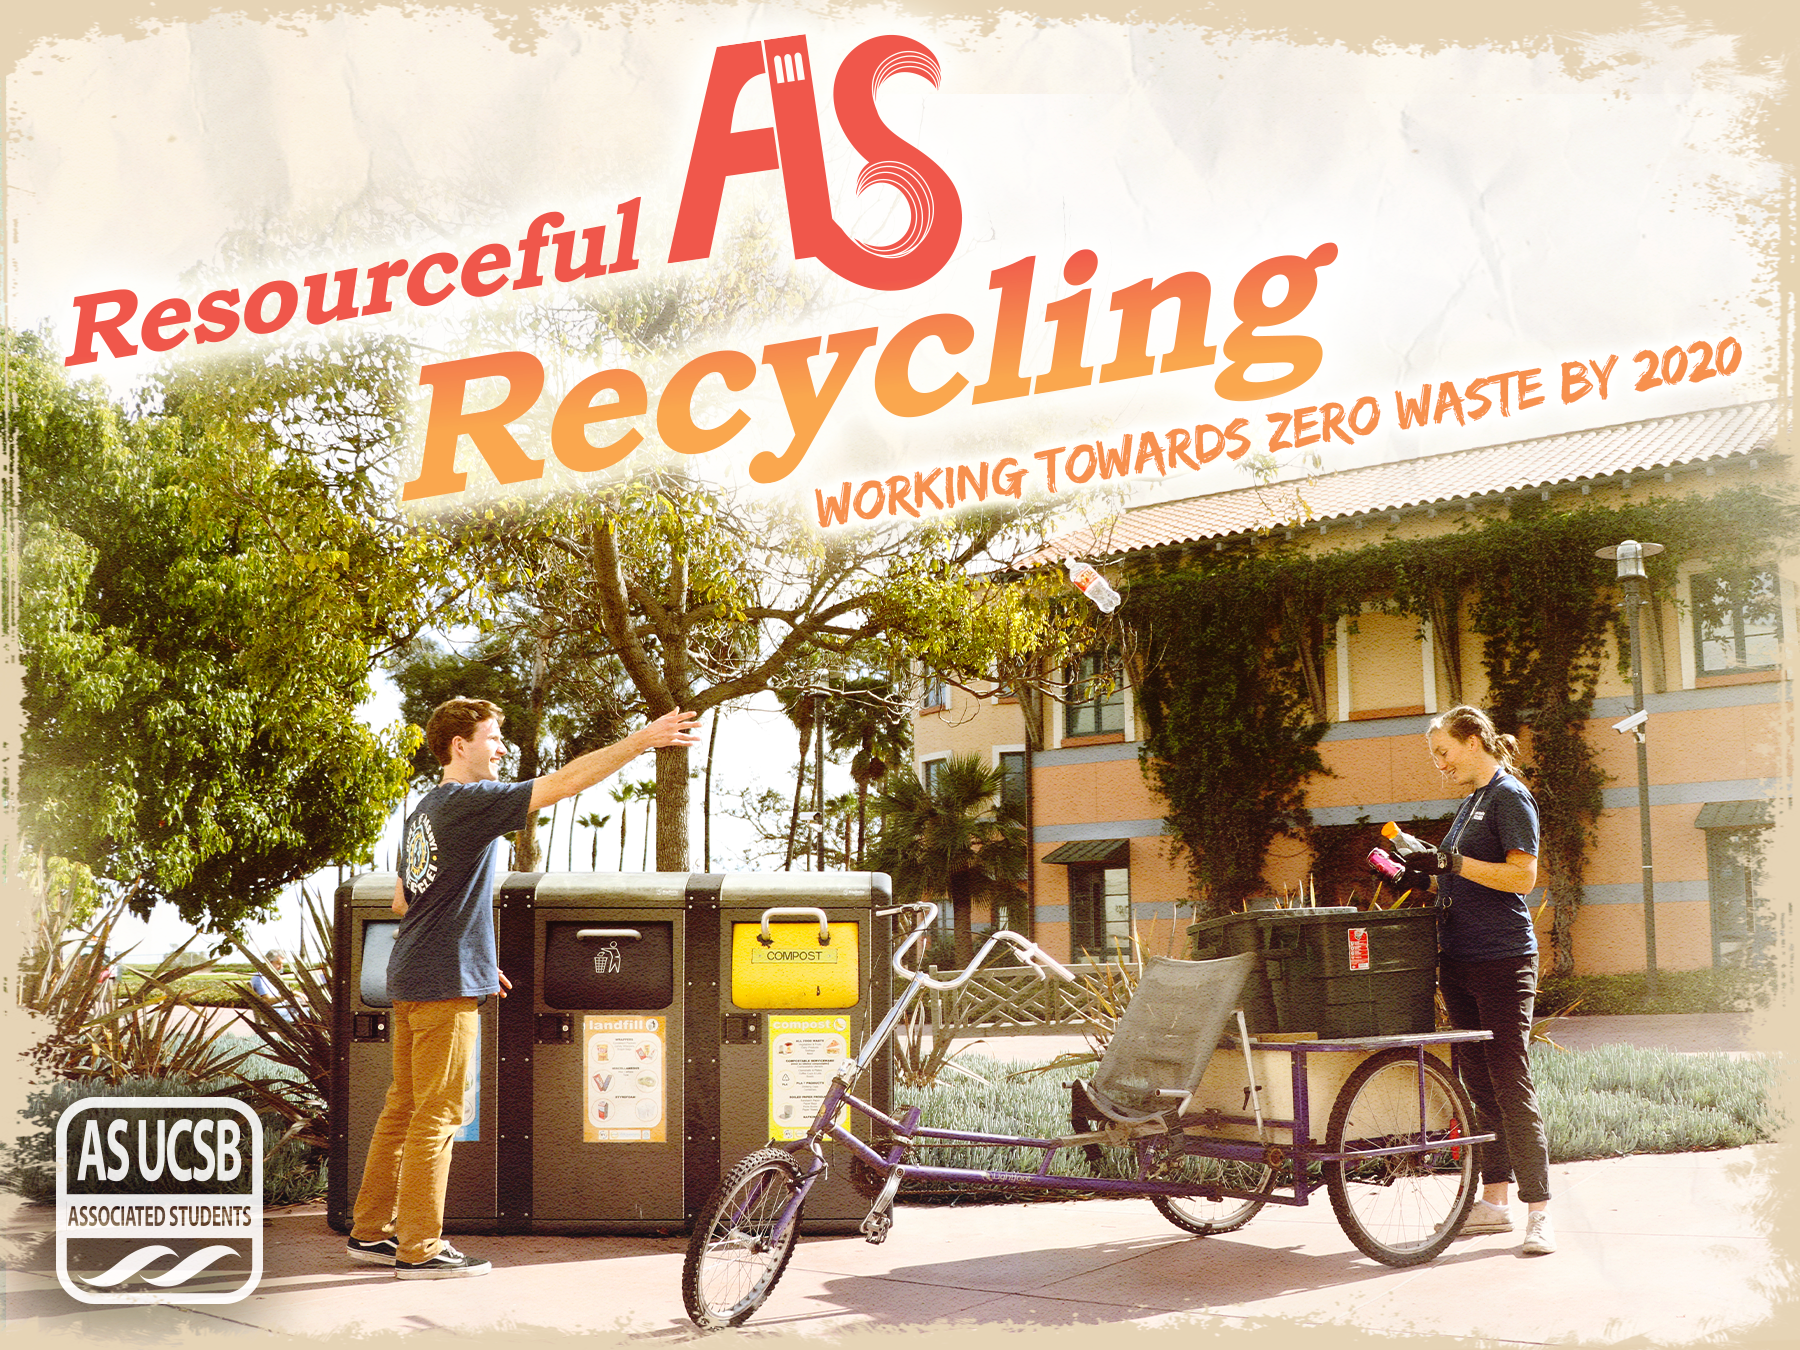 AS One Recycling